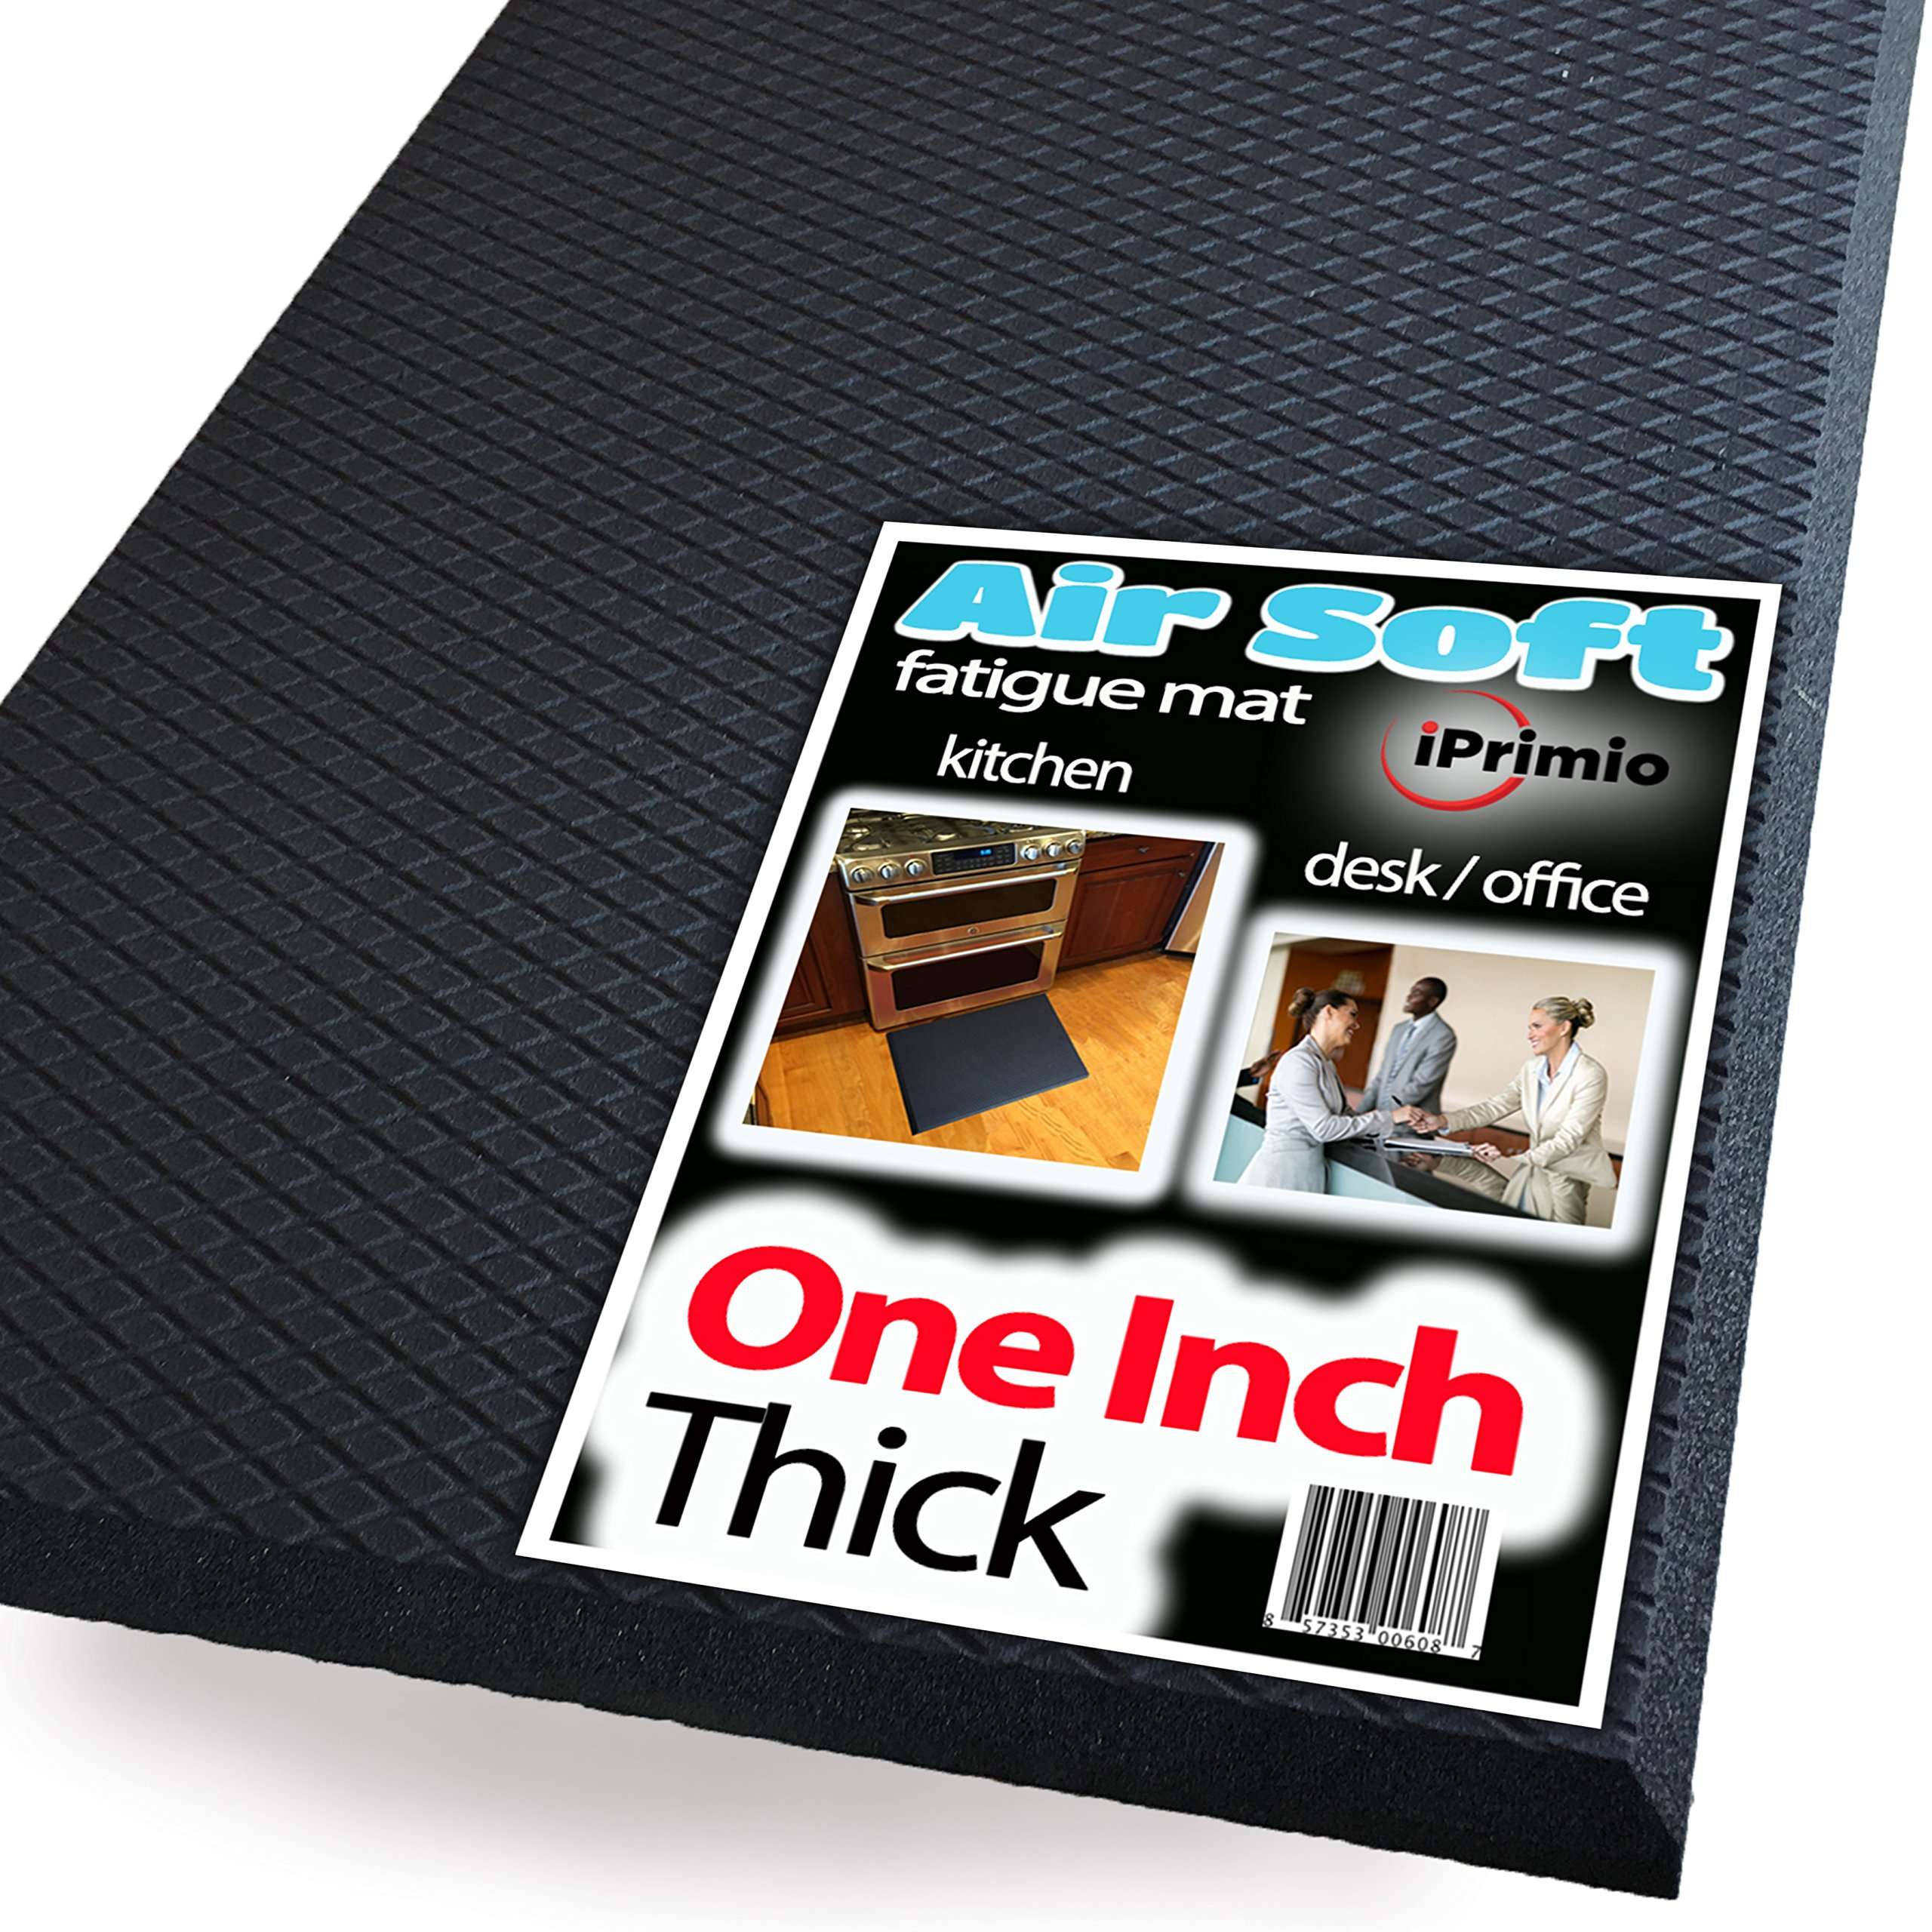 Extra Thick ONE INCH, Standing Anti Fatigue AIR SOFT Mat ...